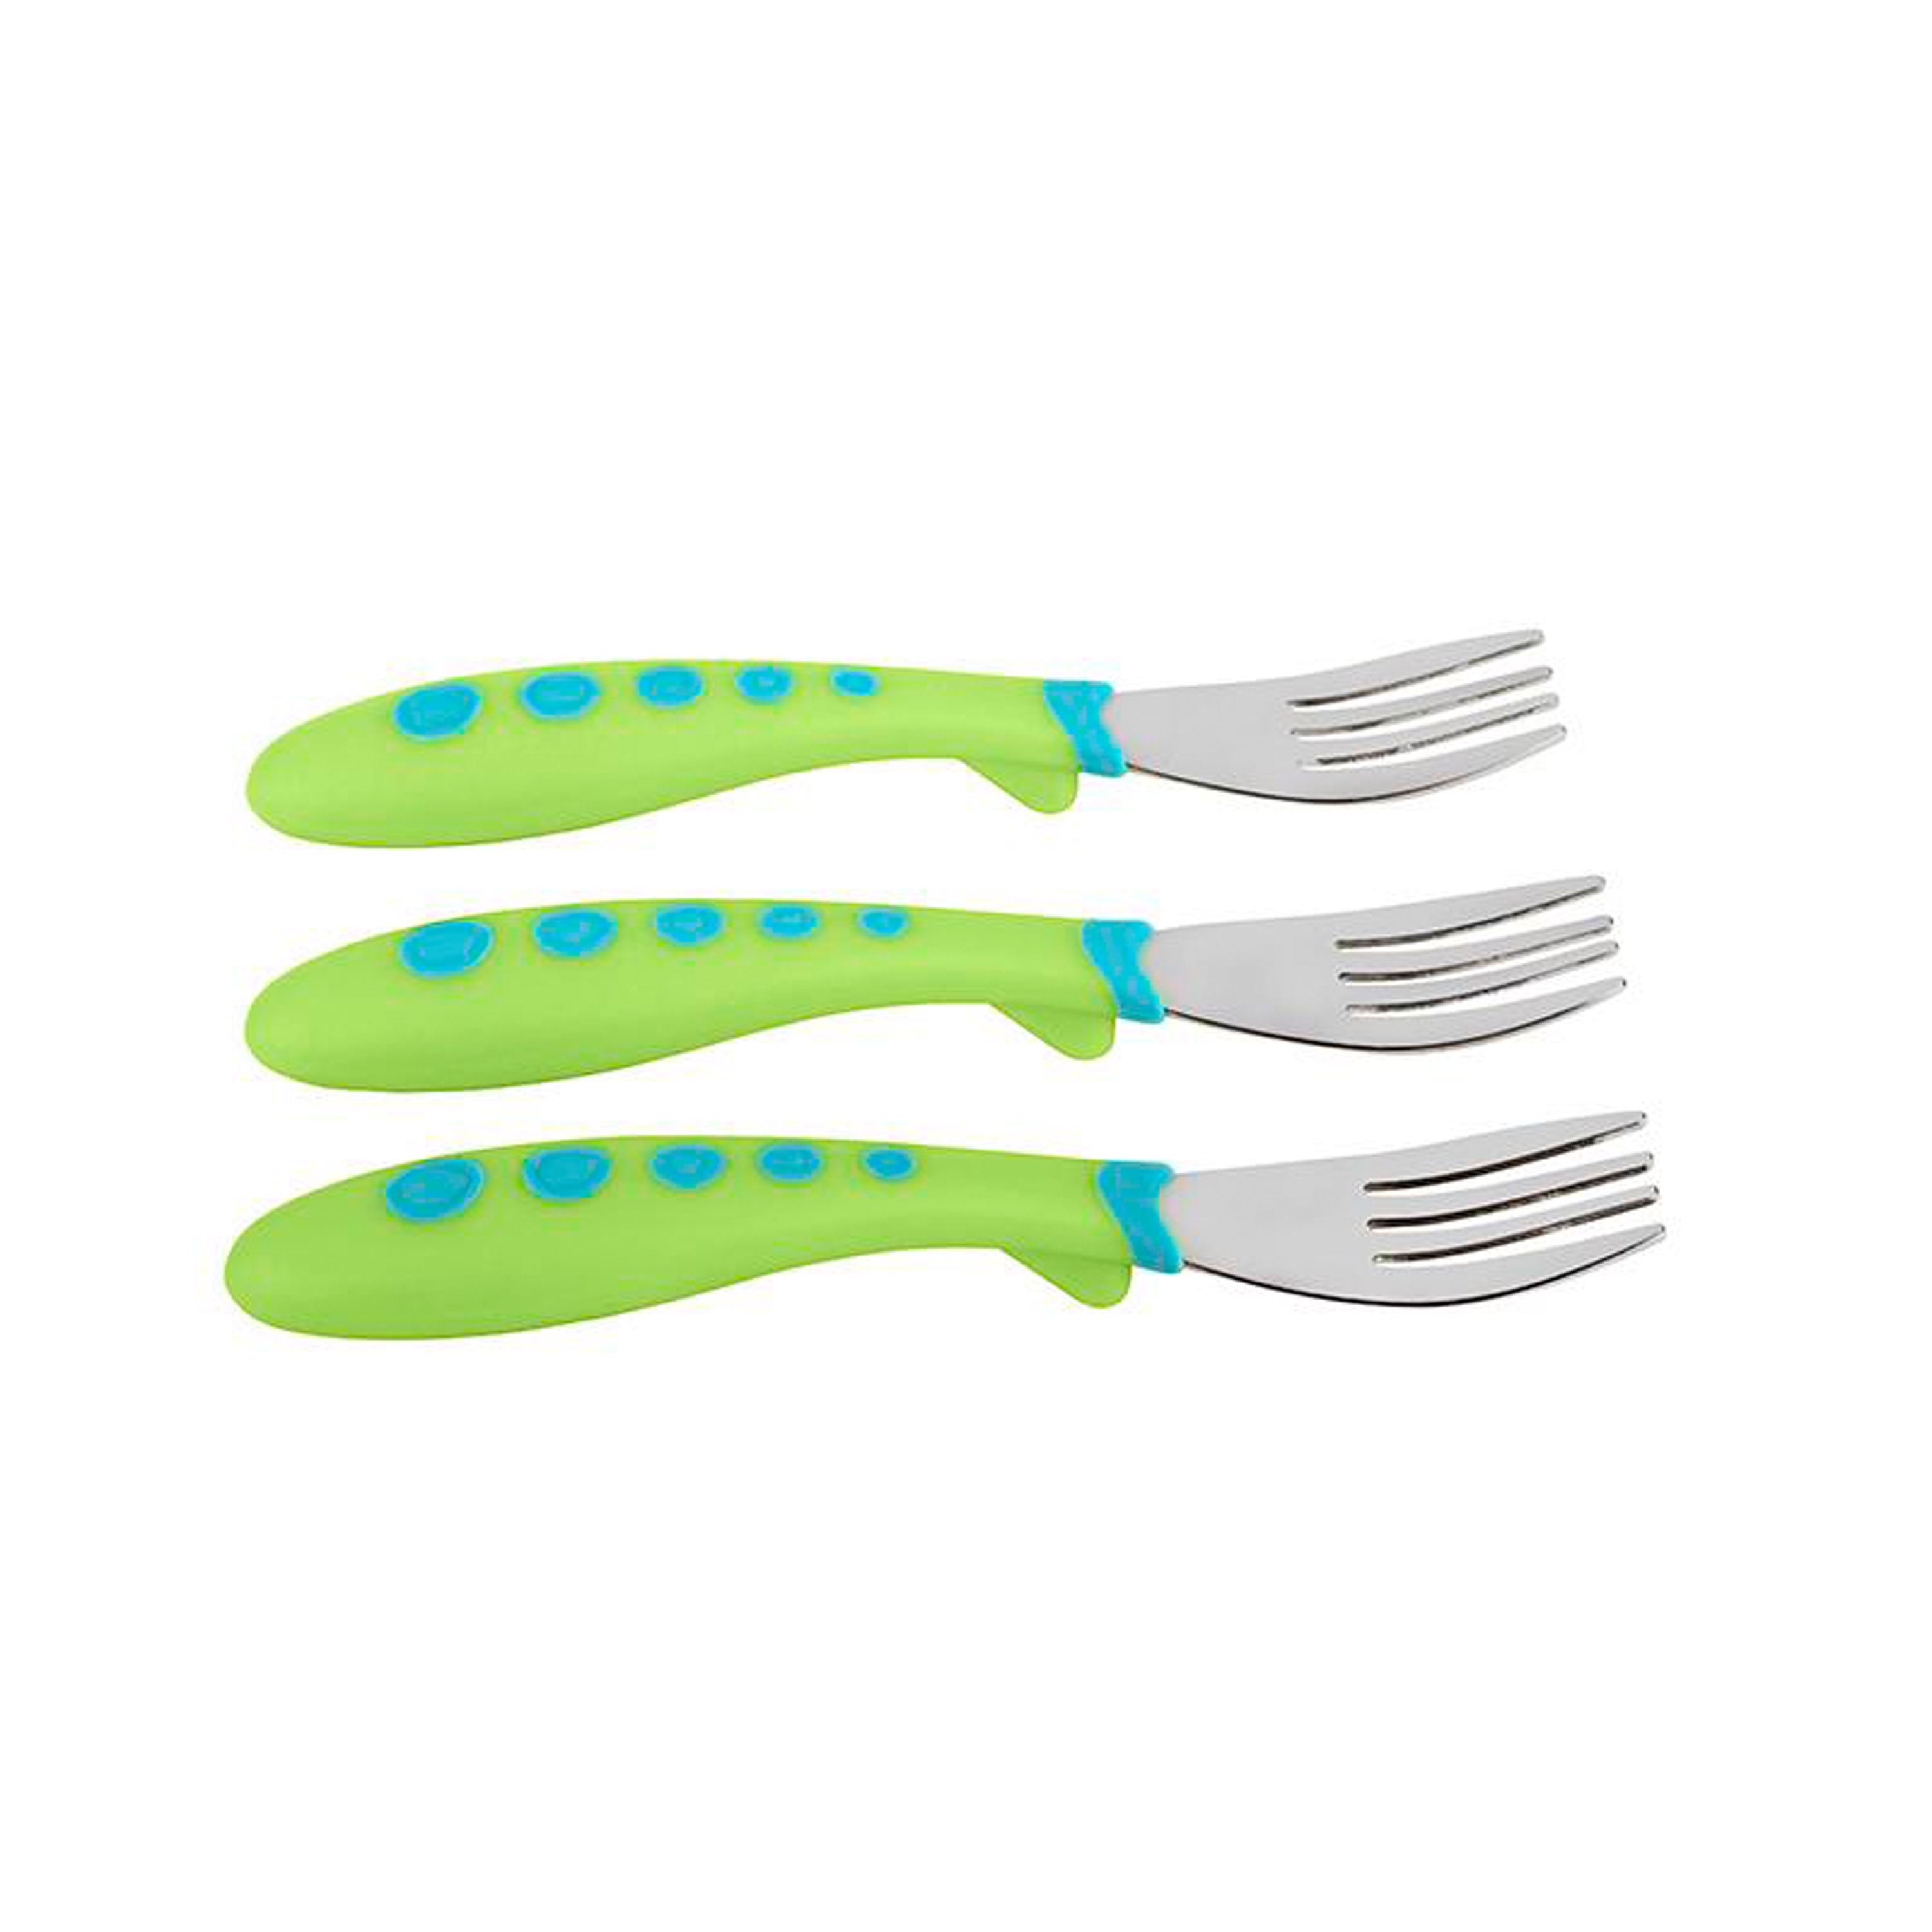 First Essentials by NUK Kiddy Cutlery Forks, 3-Pack, Green, Blue - image 4 of 6